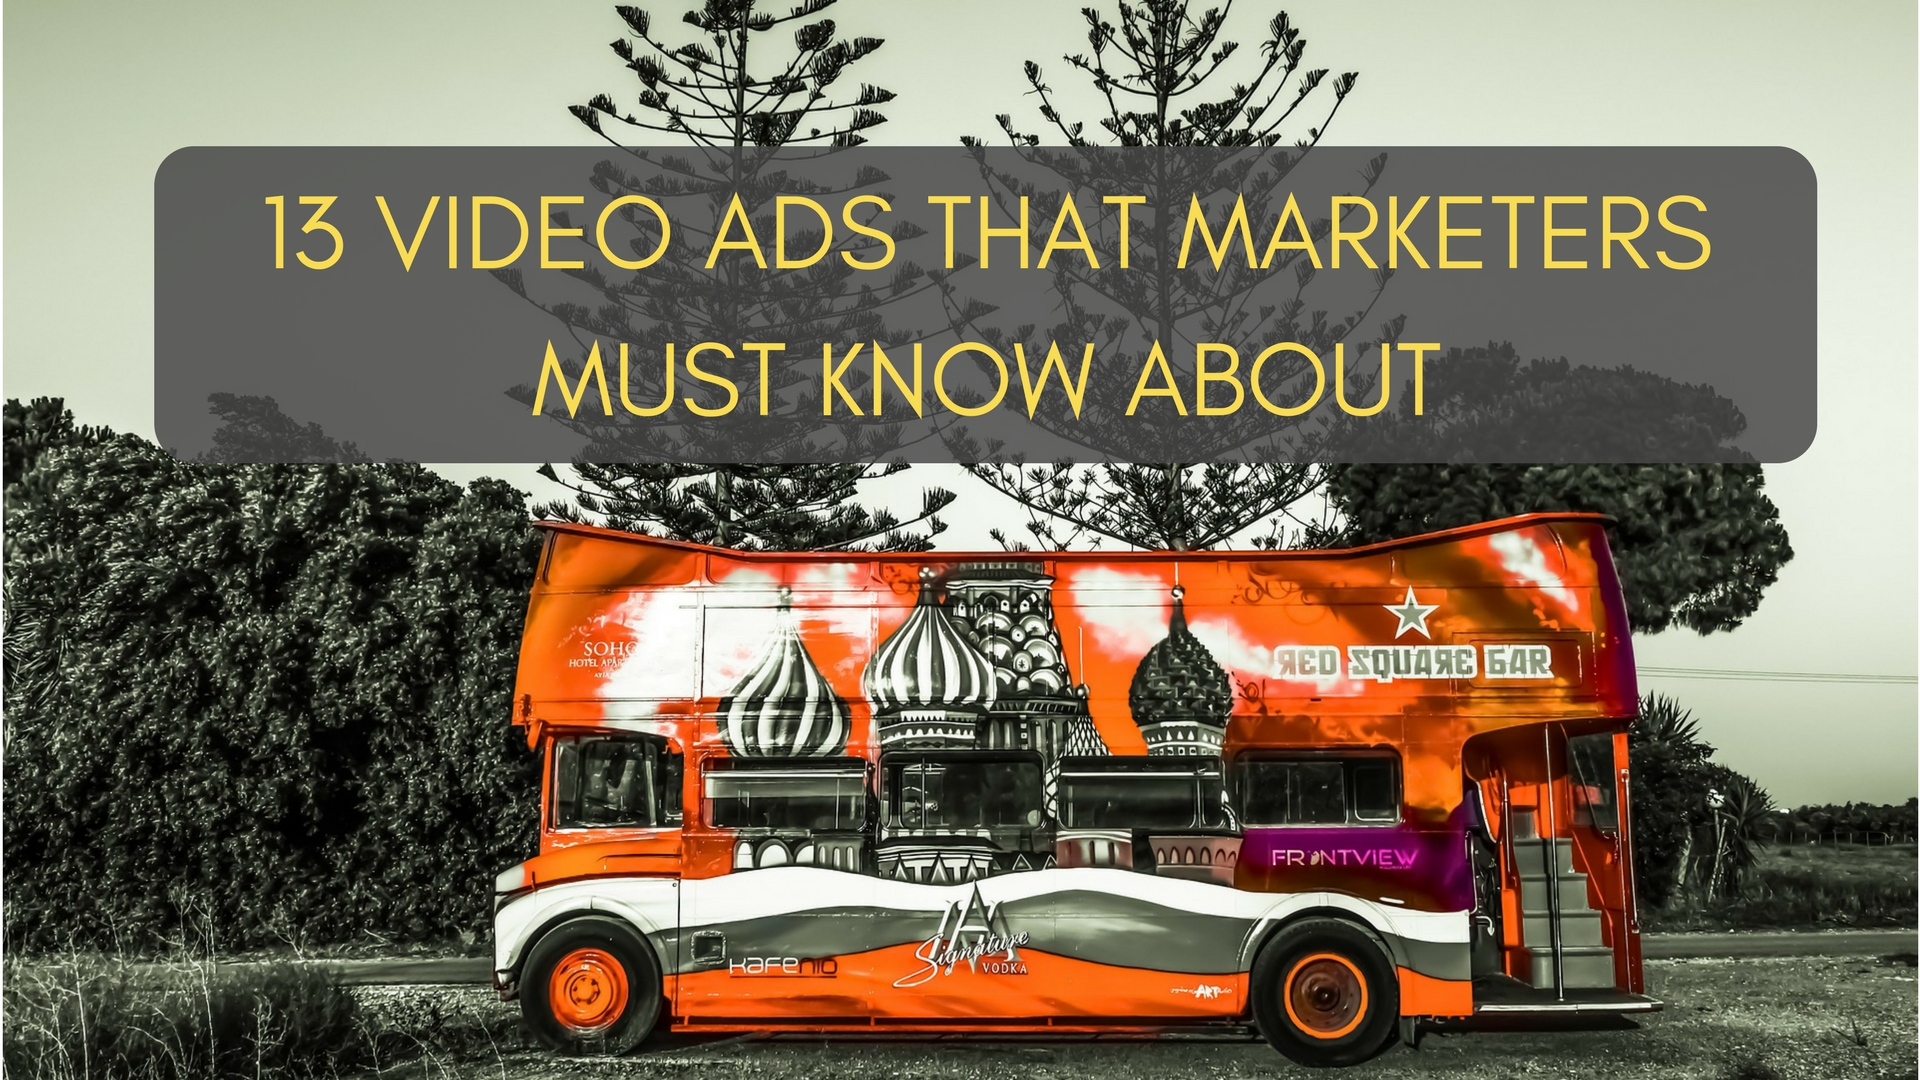 Karena Xxx Video - 13 Video Ads that Marketers Must Know About